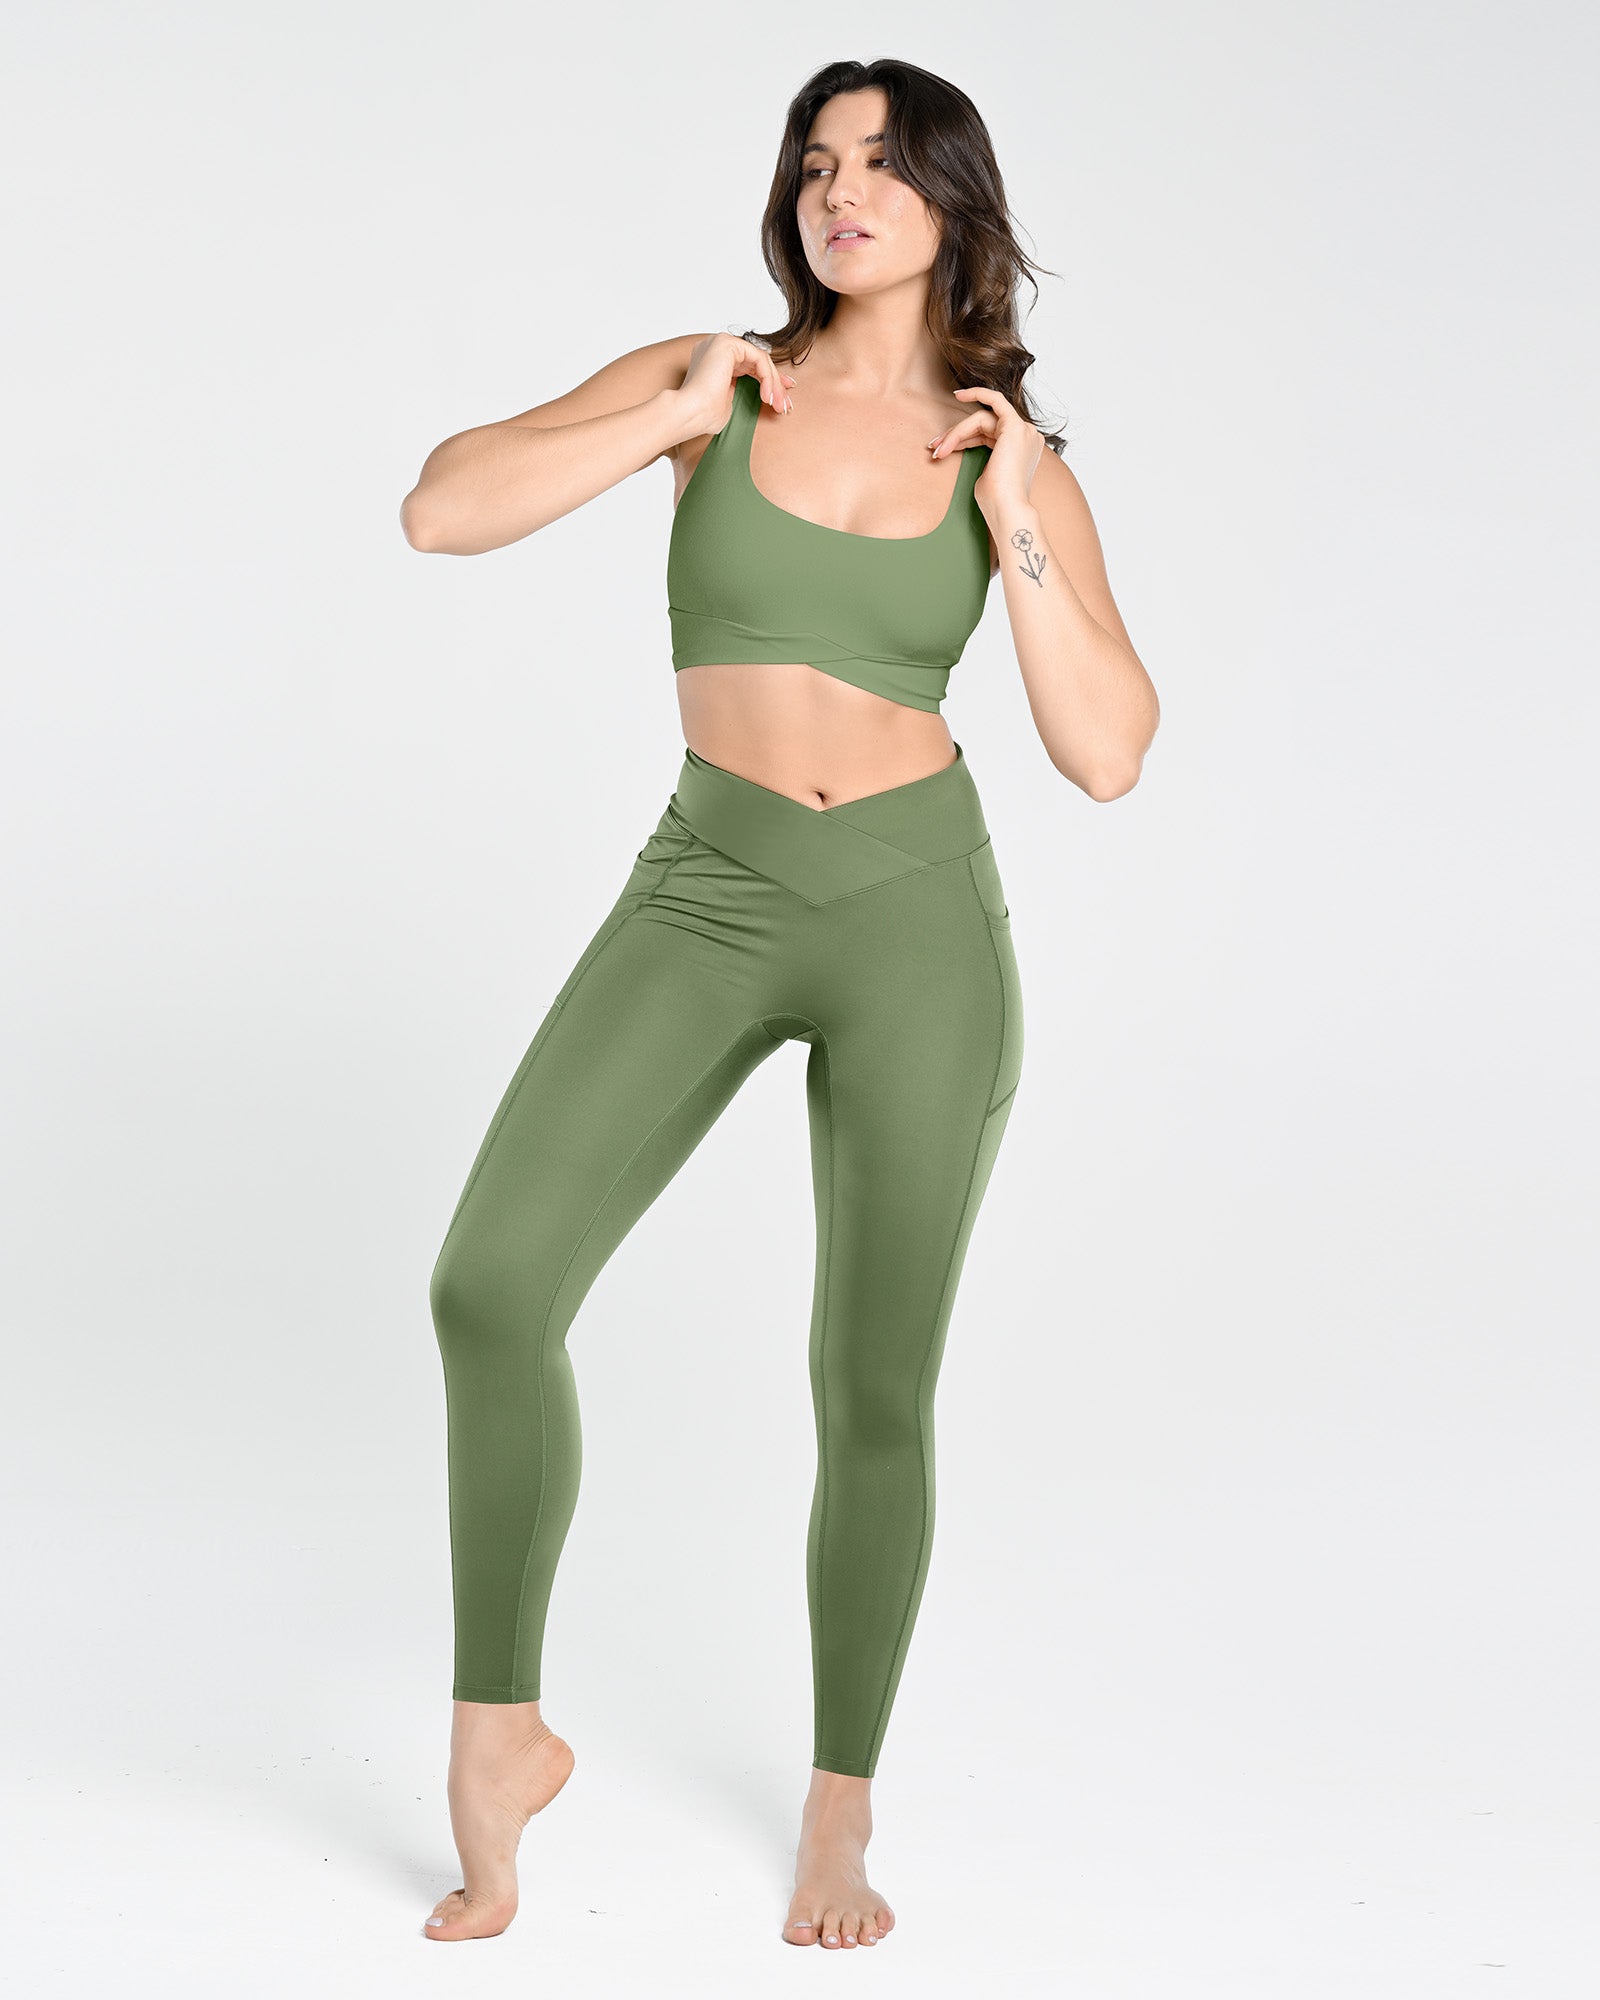 Melillette Womens Quick Dry Longline Yoga Top Breathable, Slim Fit, And  Fashionable For Outdoor Fitness And Running From Luluclothingstore906,  $15.08